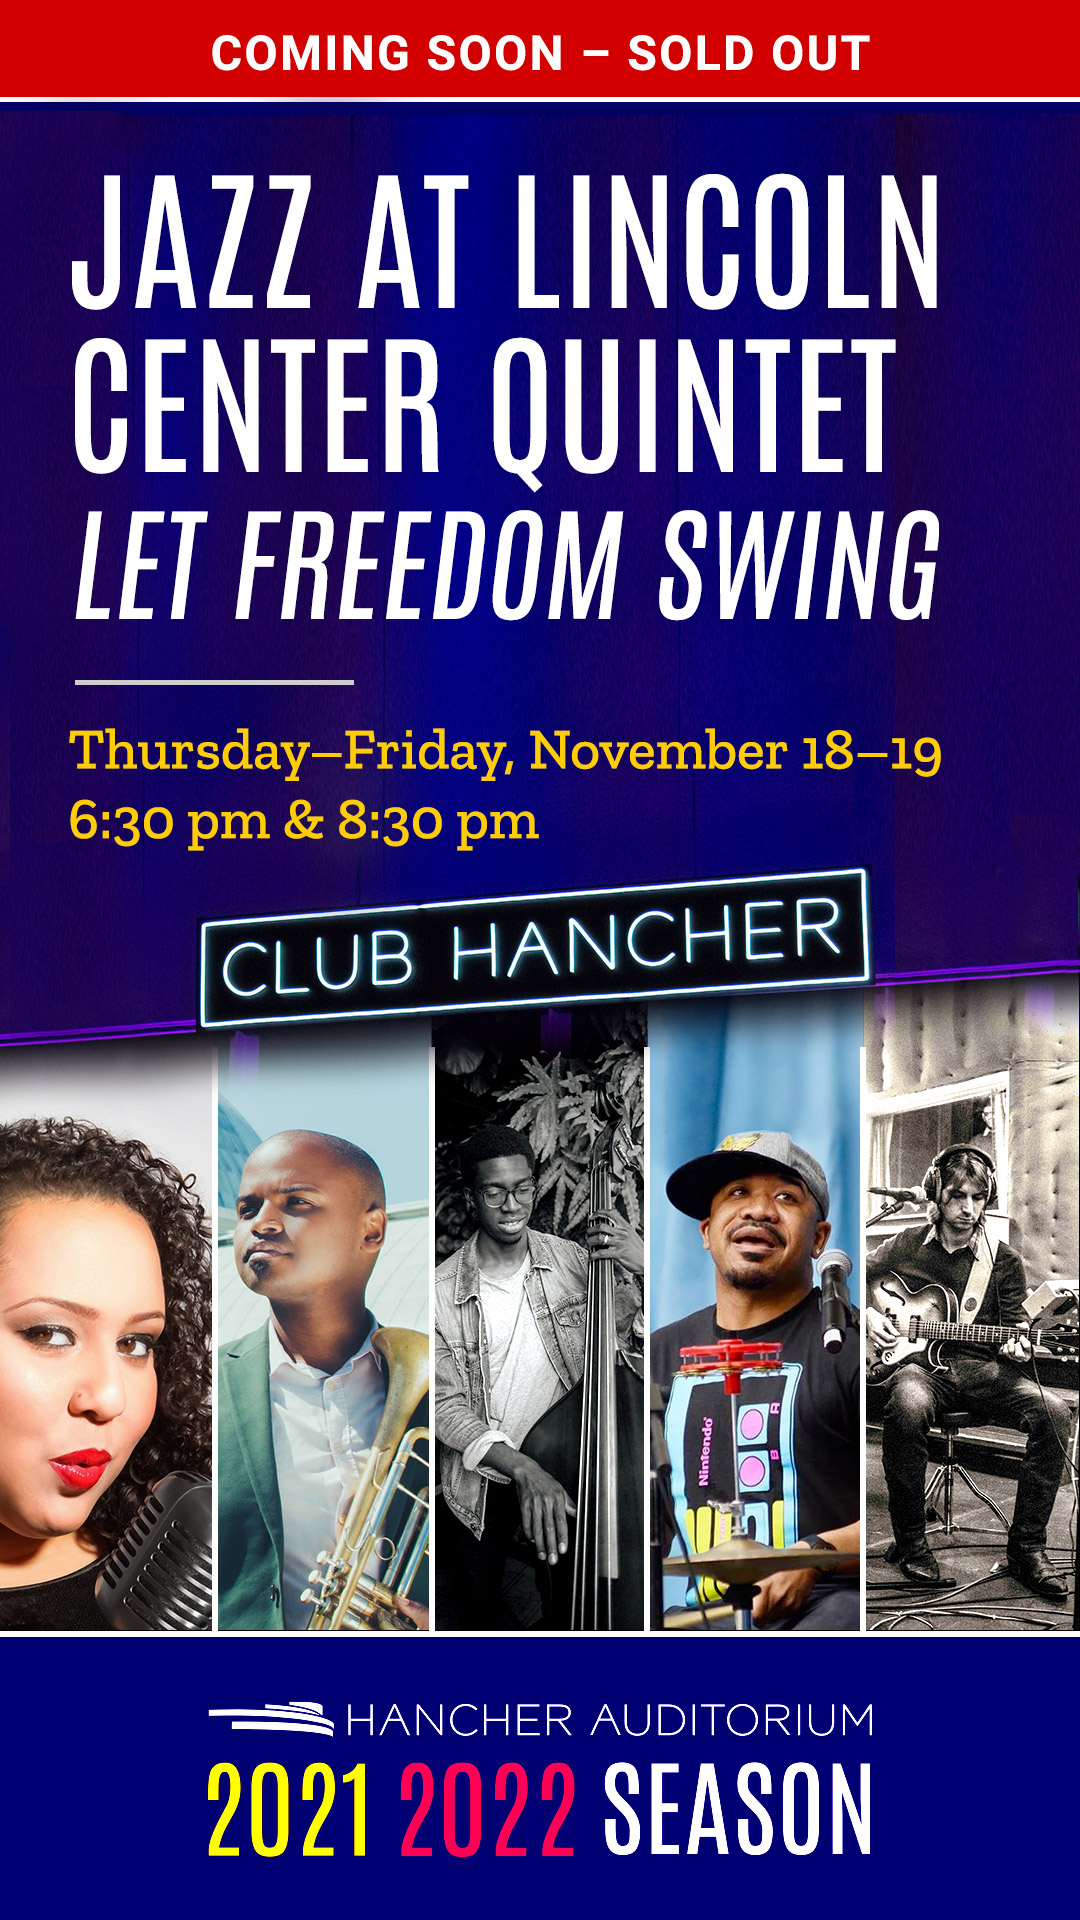 Club Hancher: Jazz at Lincoln Center Quintet, "Let Freedom Swing" - Coming soon - Sold out